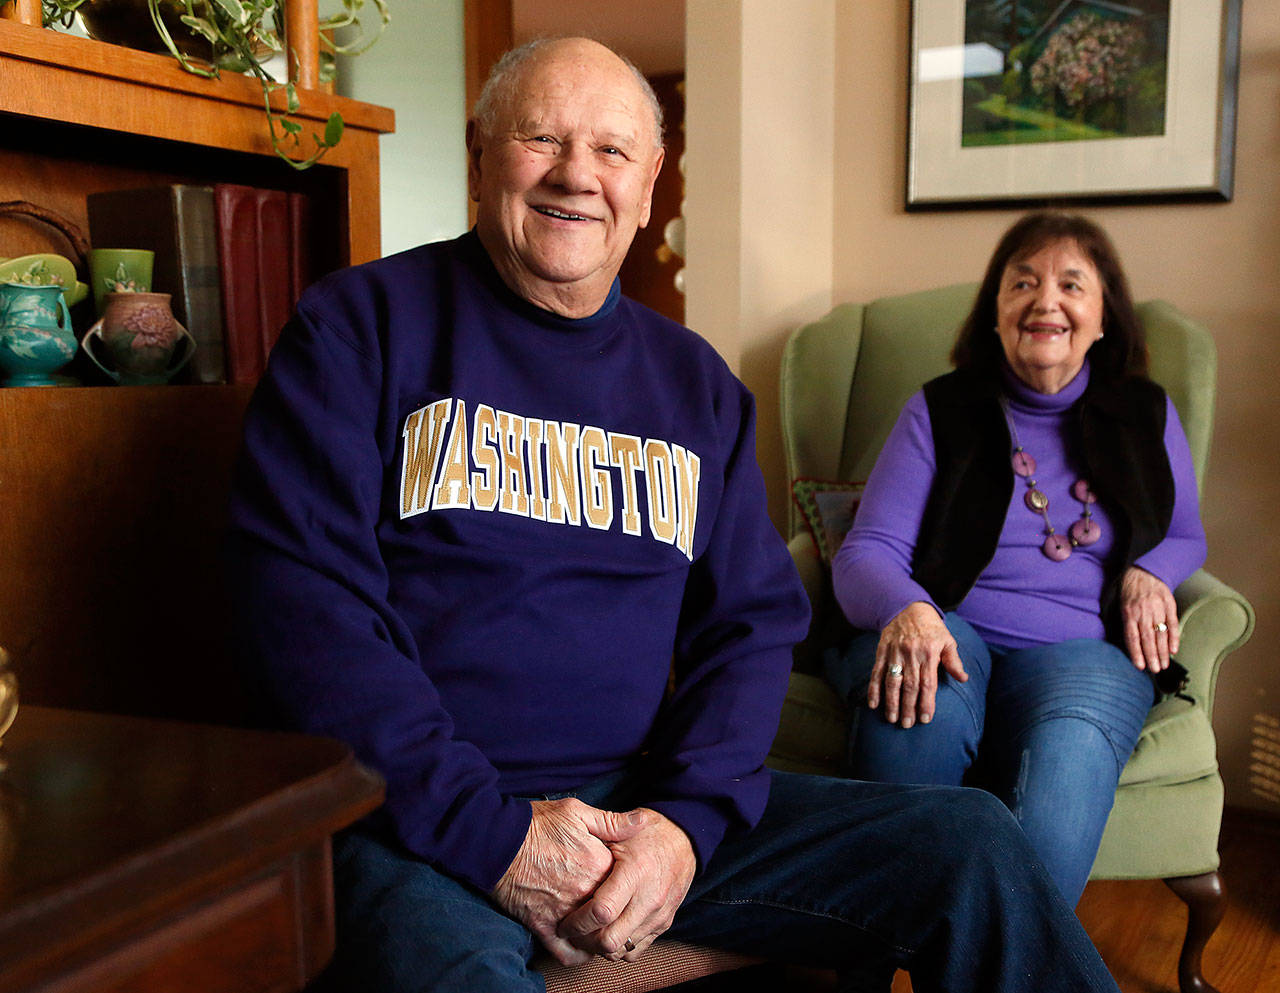 A 1956 University of Washington graduate, Thor Donald Linde and his wife, Pat, have been Husky season ticket holders since 1964, attending 15 bowl games, including seven Rose Bowls. In all the regular Husky football games during that span, they have only missed a half-dozen or so. (Dan Bates / The Herald)